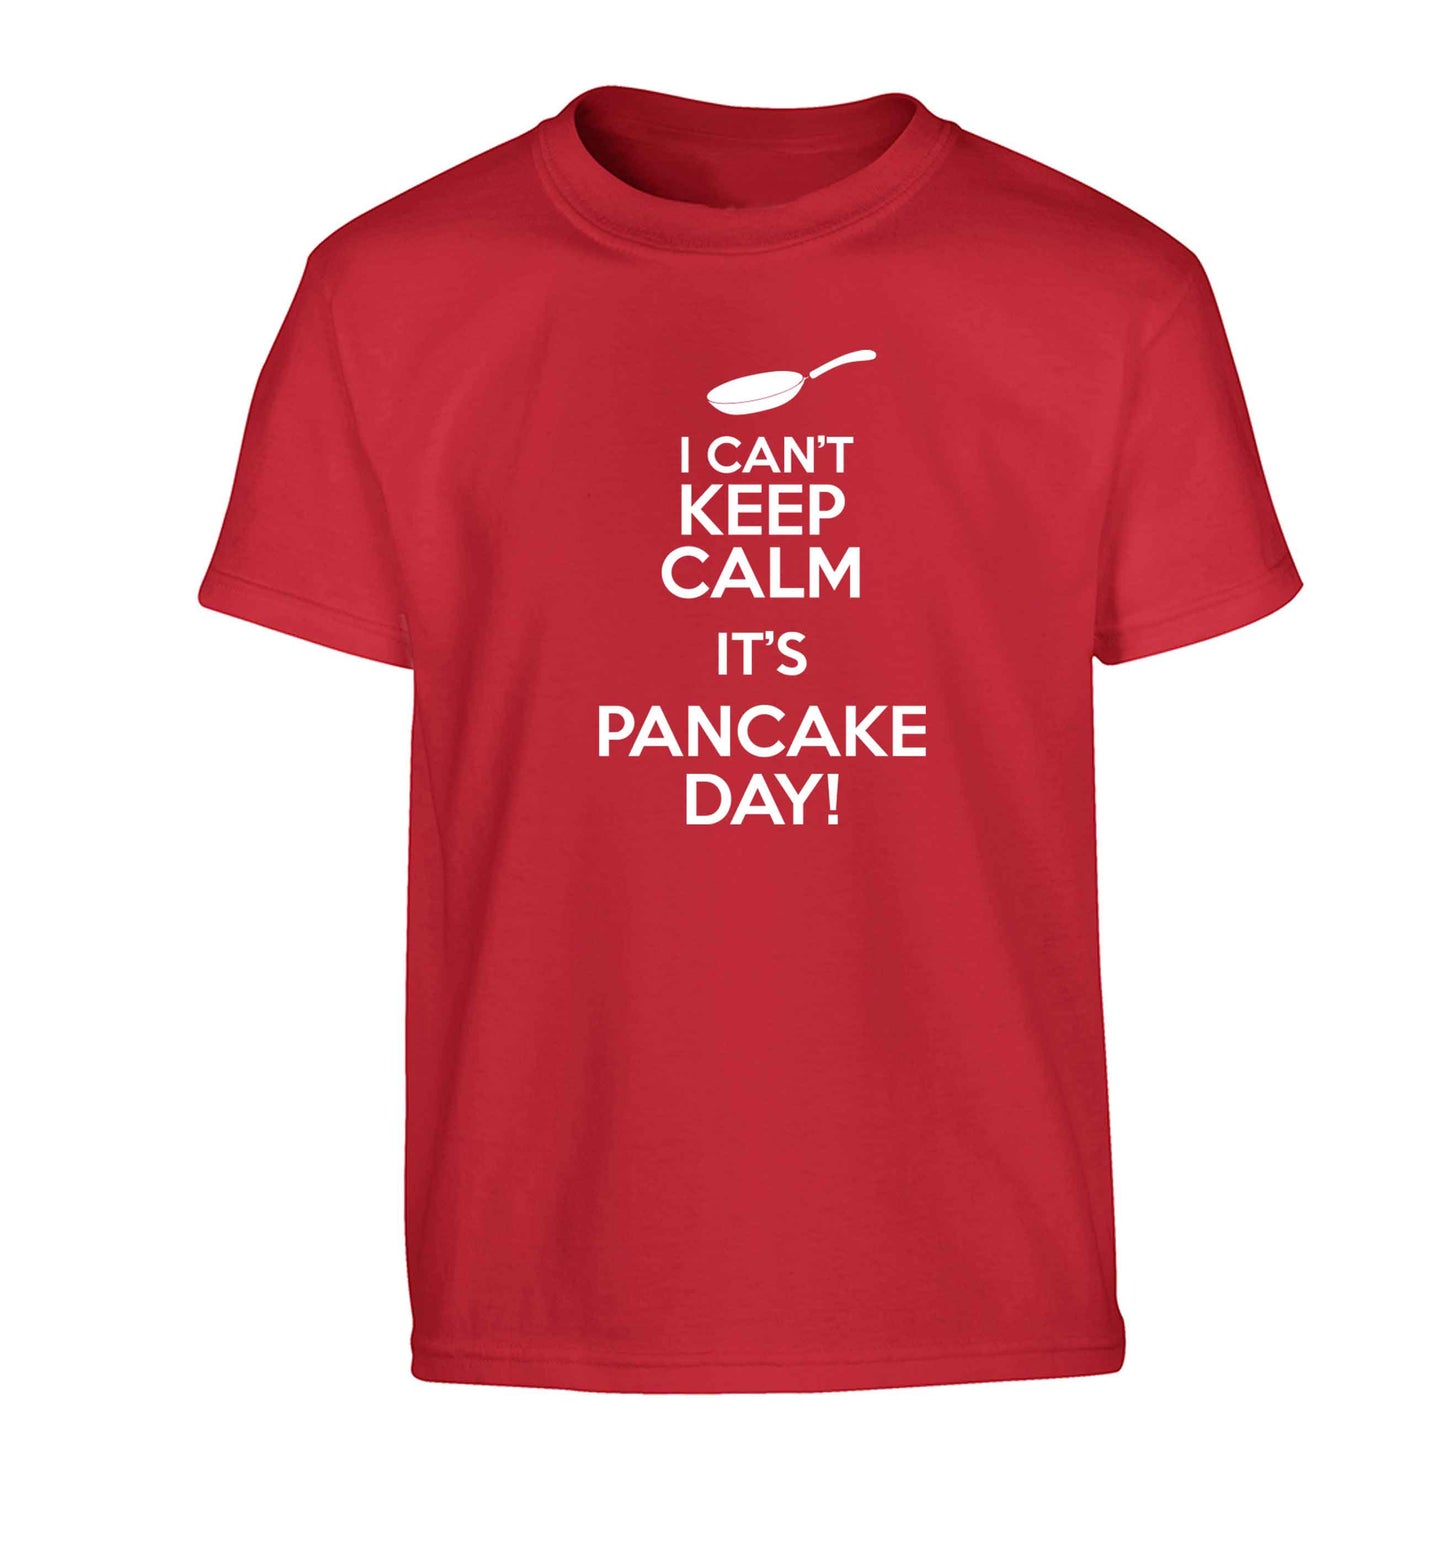 I can't keep calm it's pancake day! Children's red Tshirt 12-13 Years